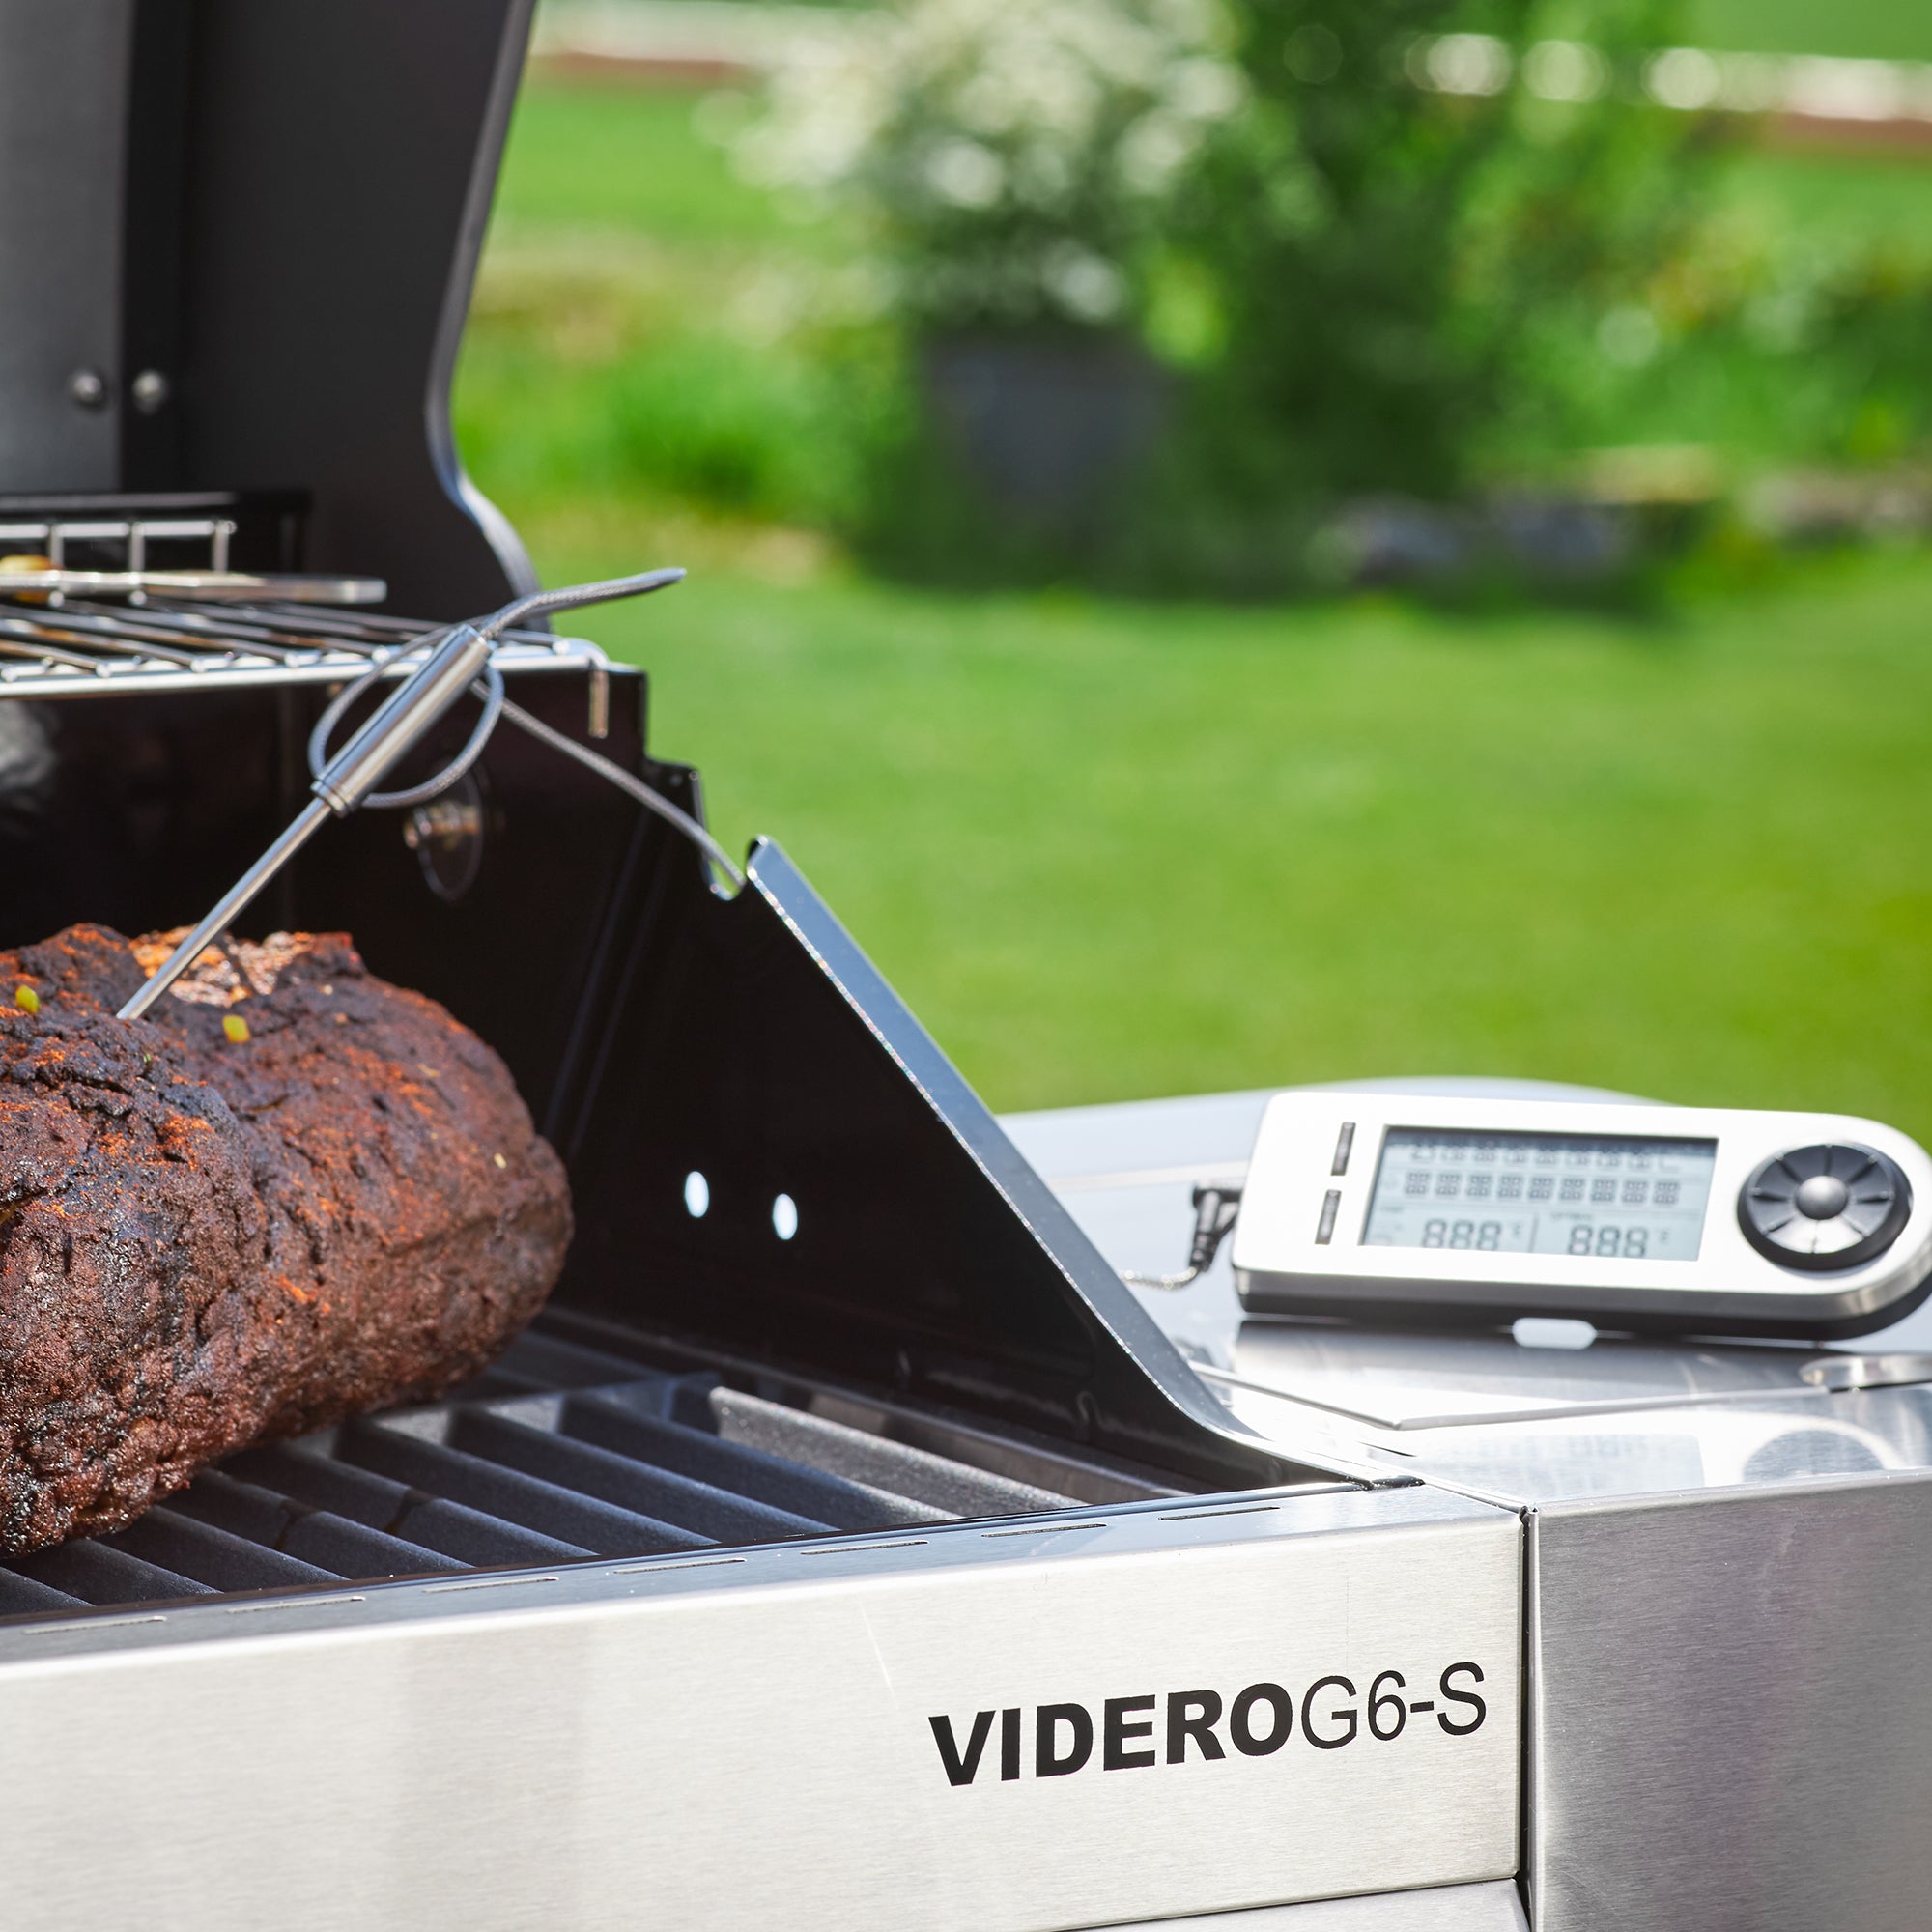 BBQ Thermometer Digitaal